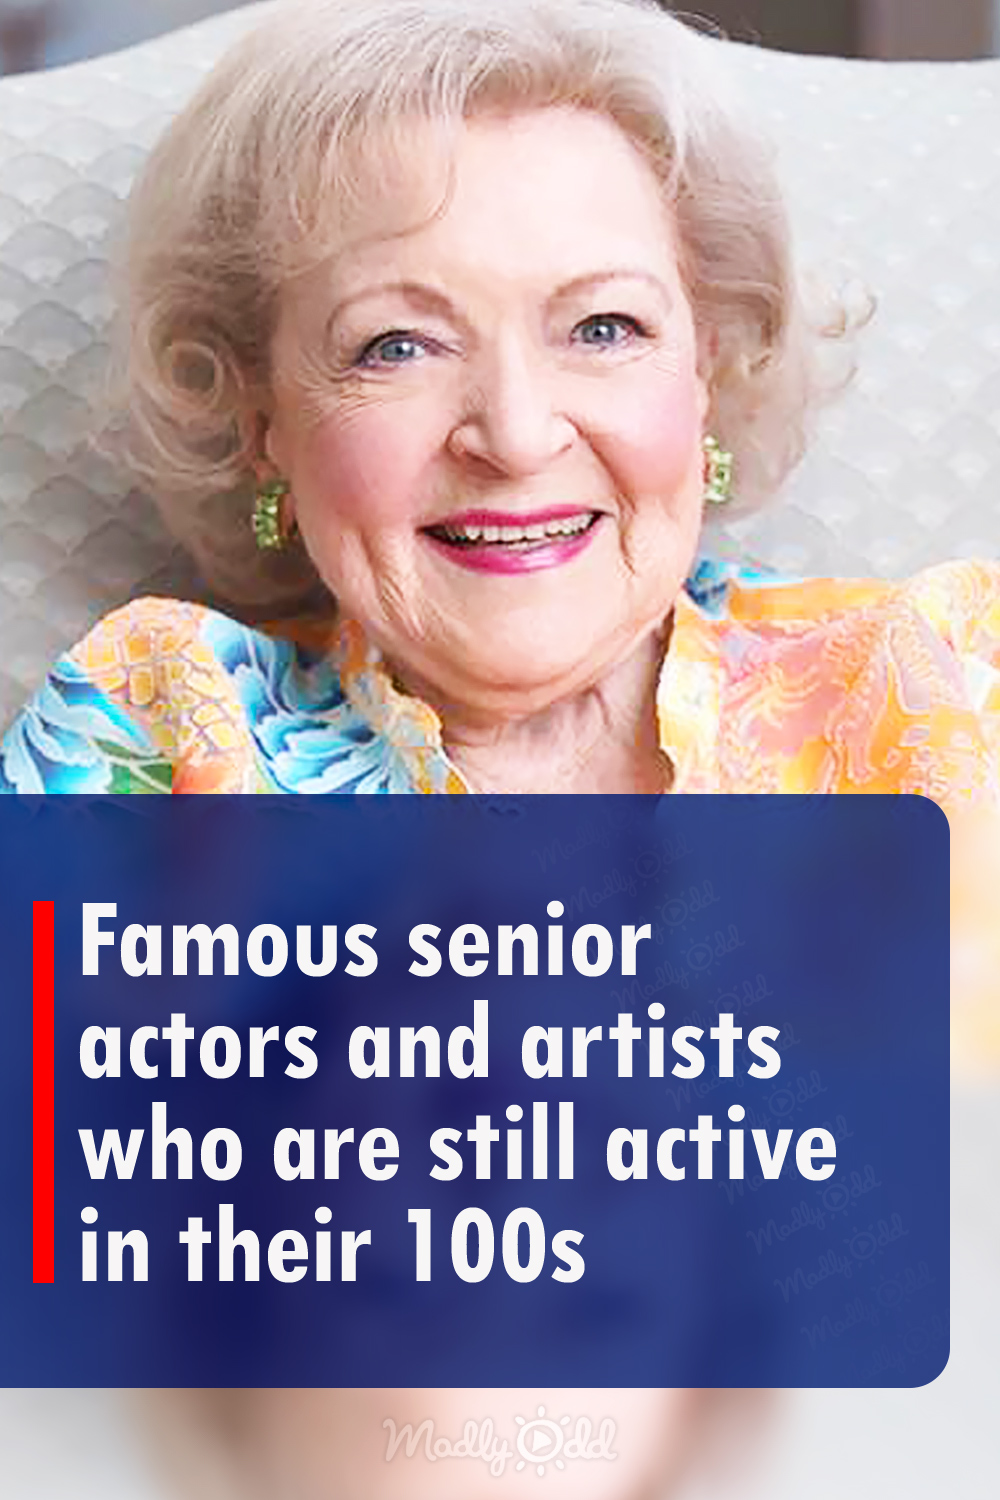 Famous senior actors and artists who are still active in their 100s